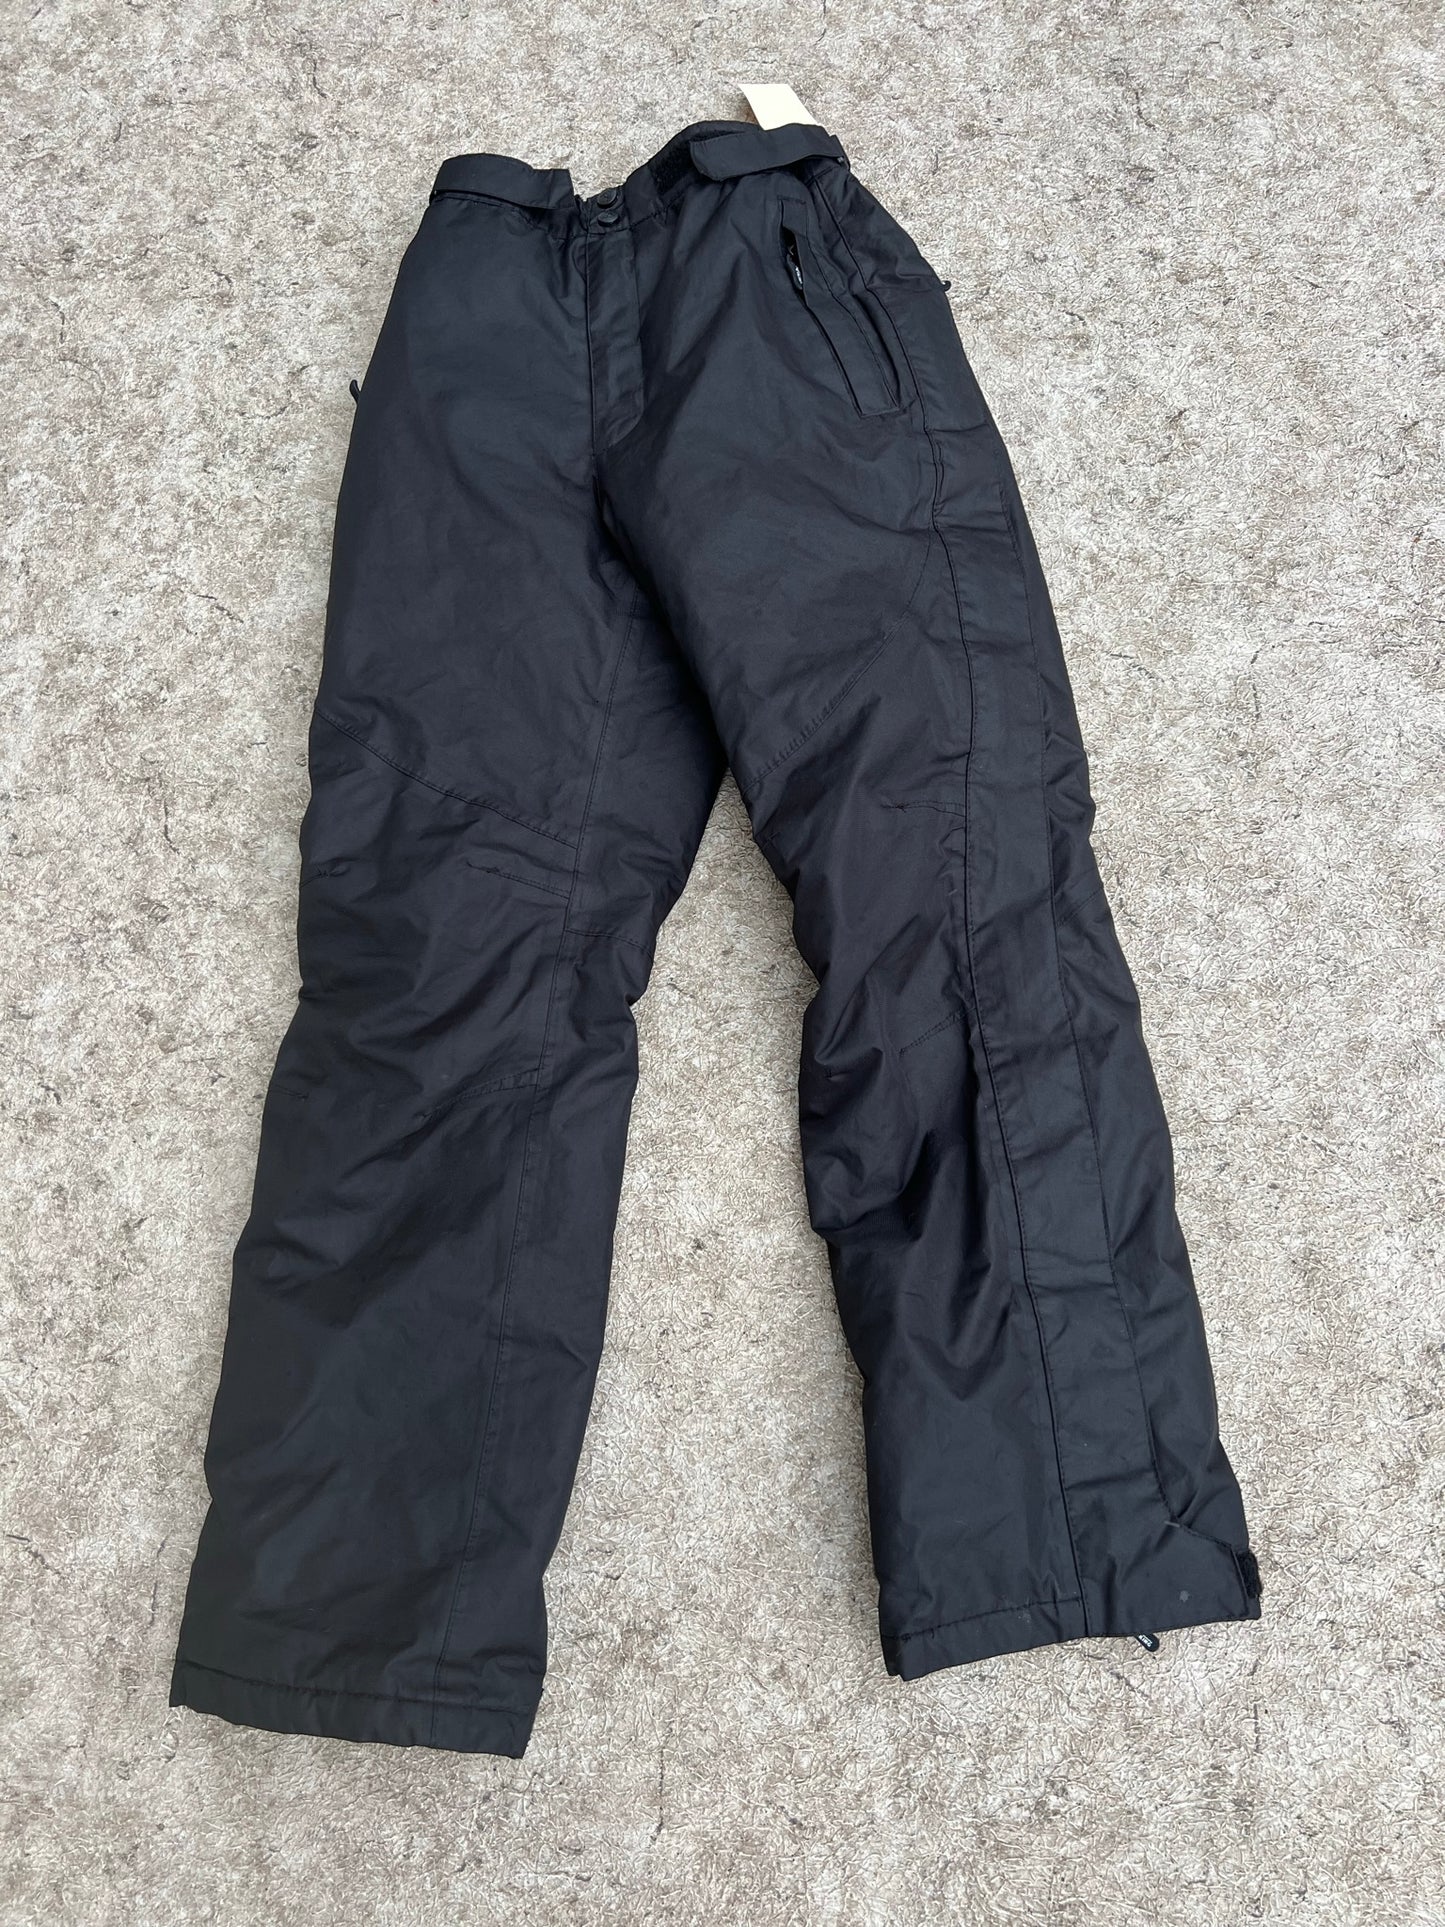 Rain Pants Ladies Size Small Viking Creekside Tri Zone Waterproof Windproof Can Be Worn For Snow Pants New Demo Model